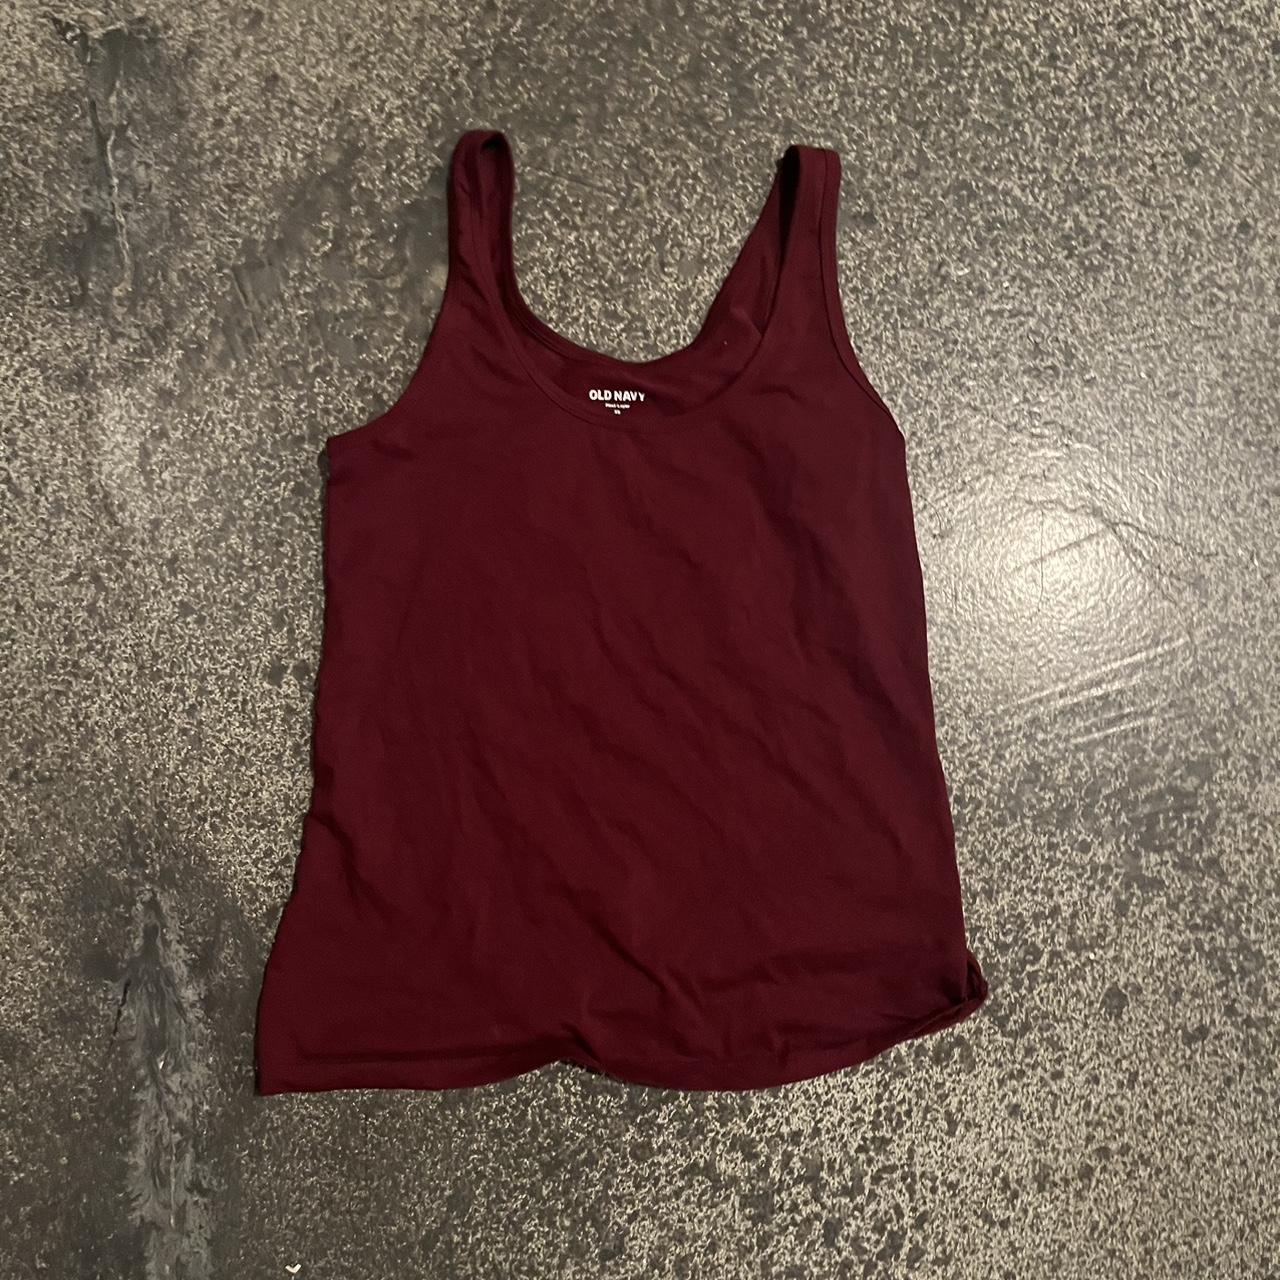 Old navy red tank top Says size small but it’s... - Depop